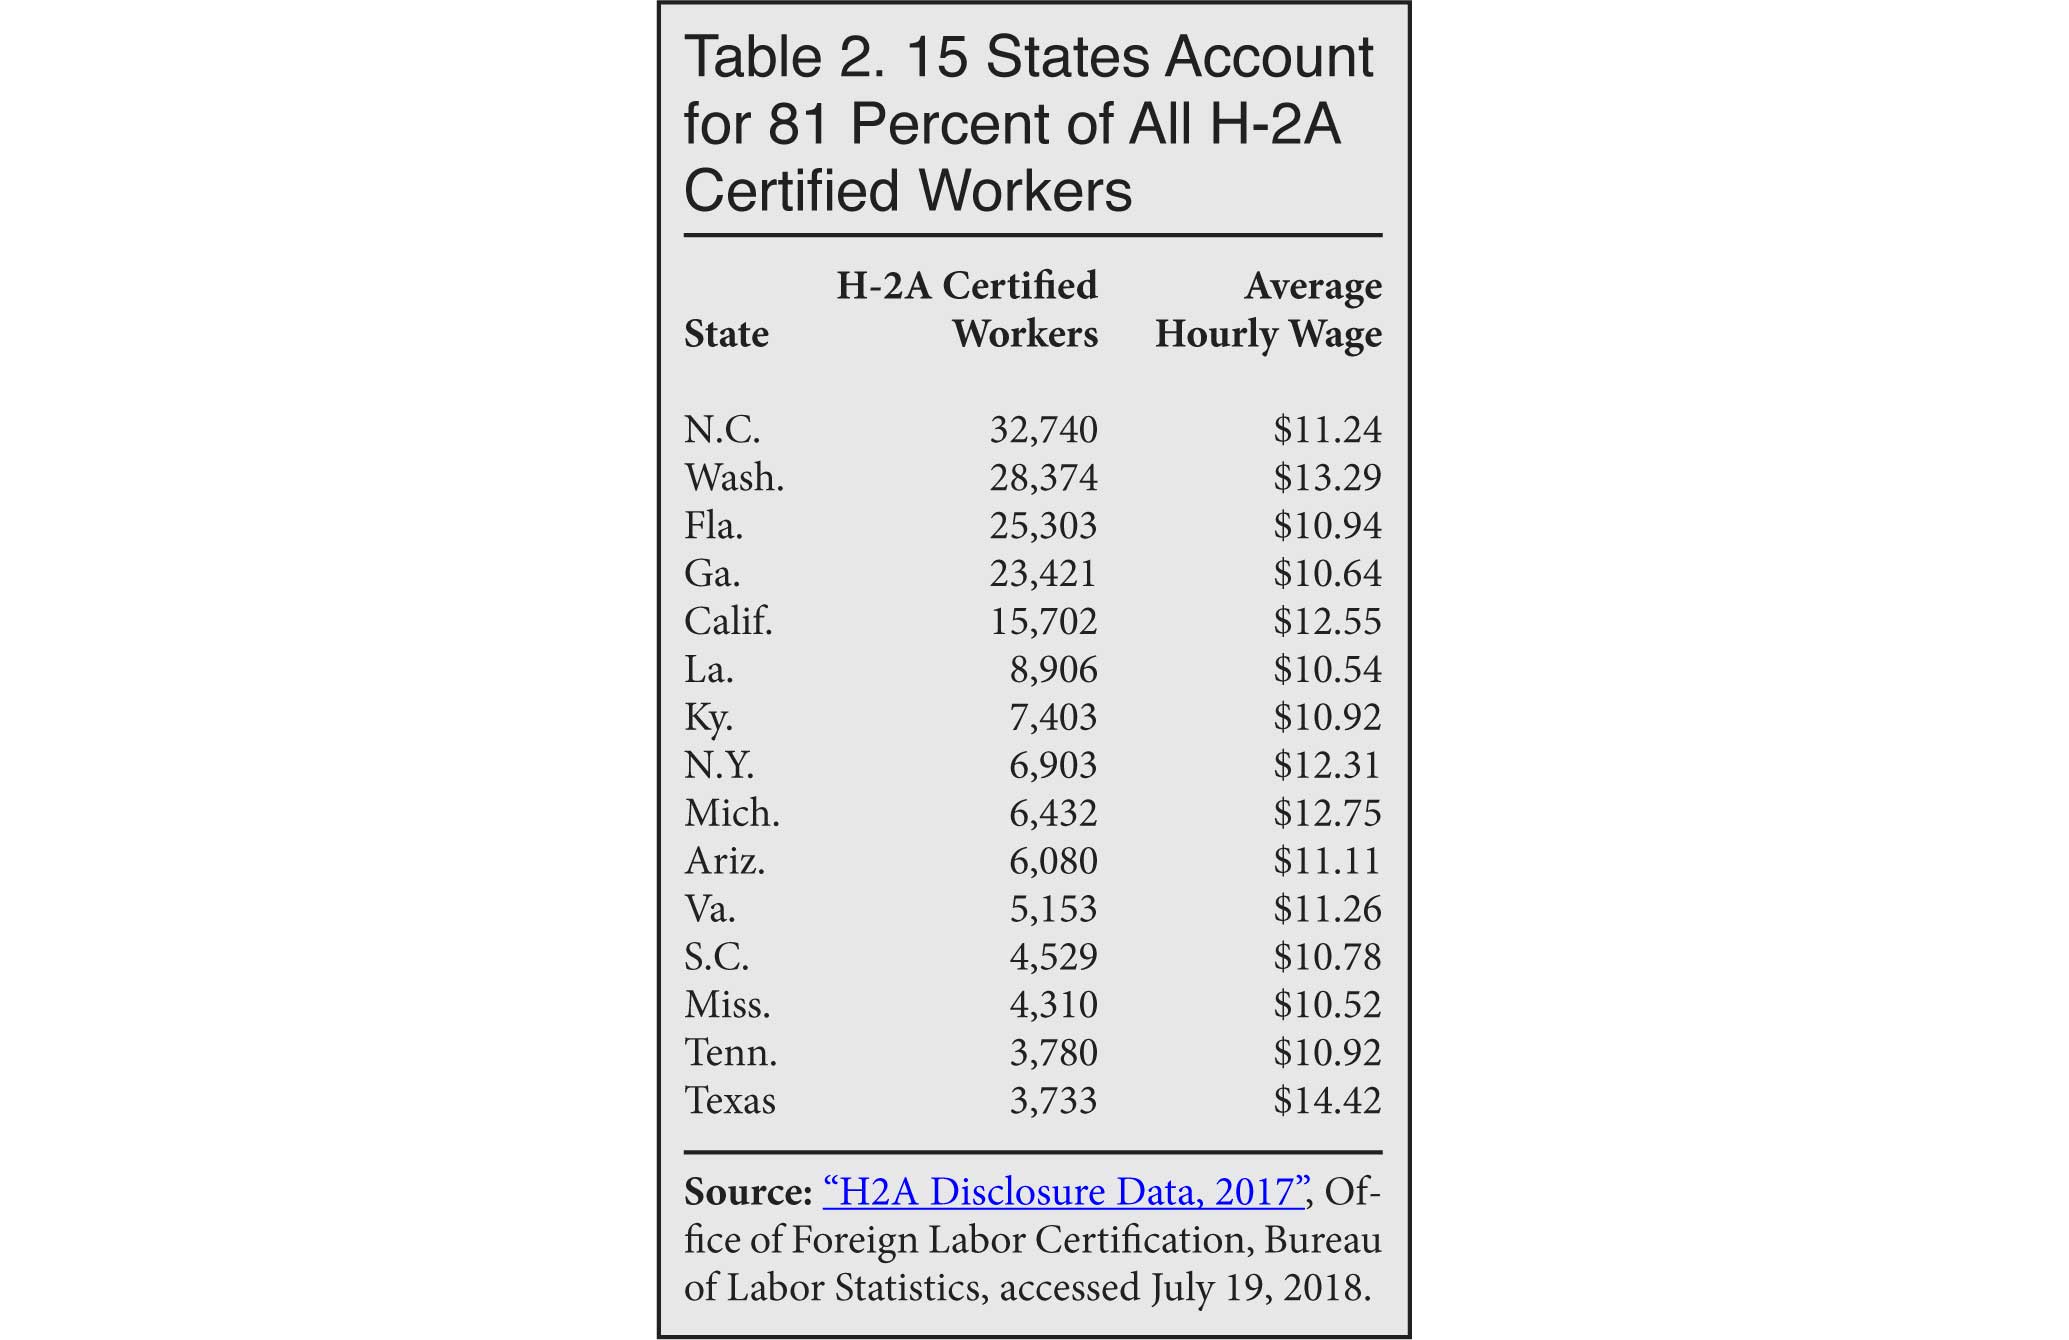 Table: 15 States Account for 81% of All H-2A Certified Workers